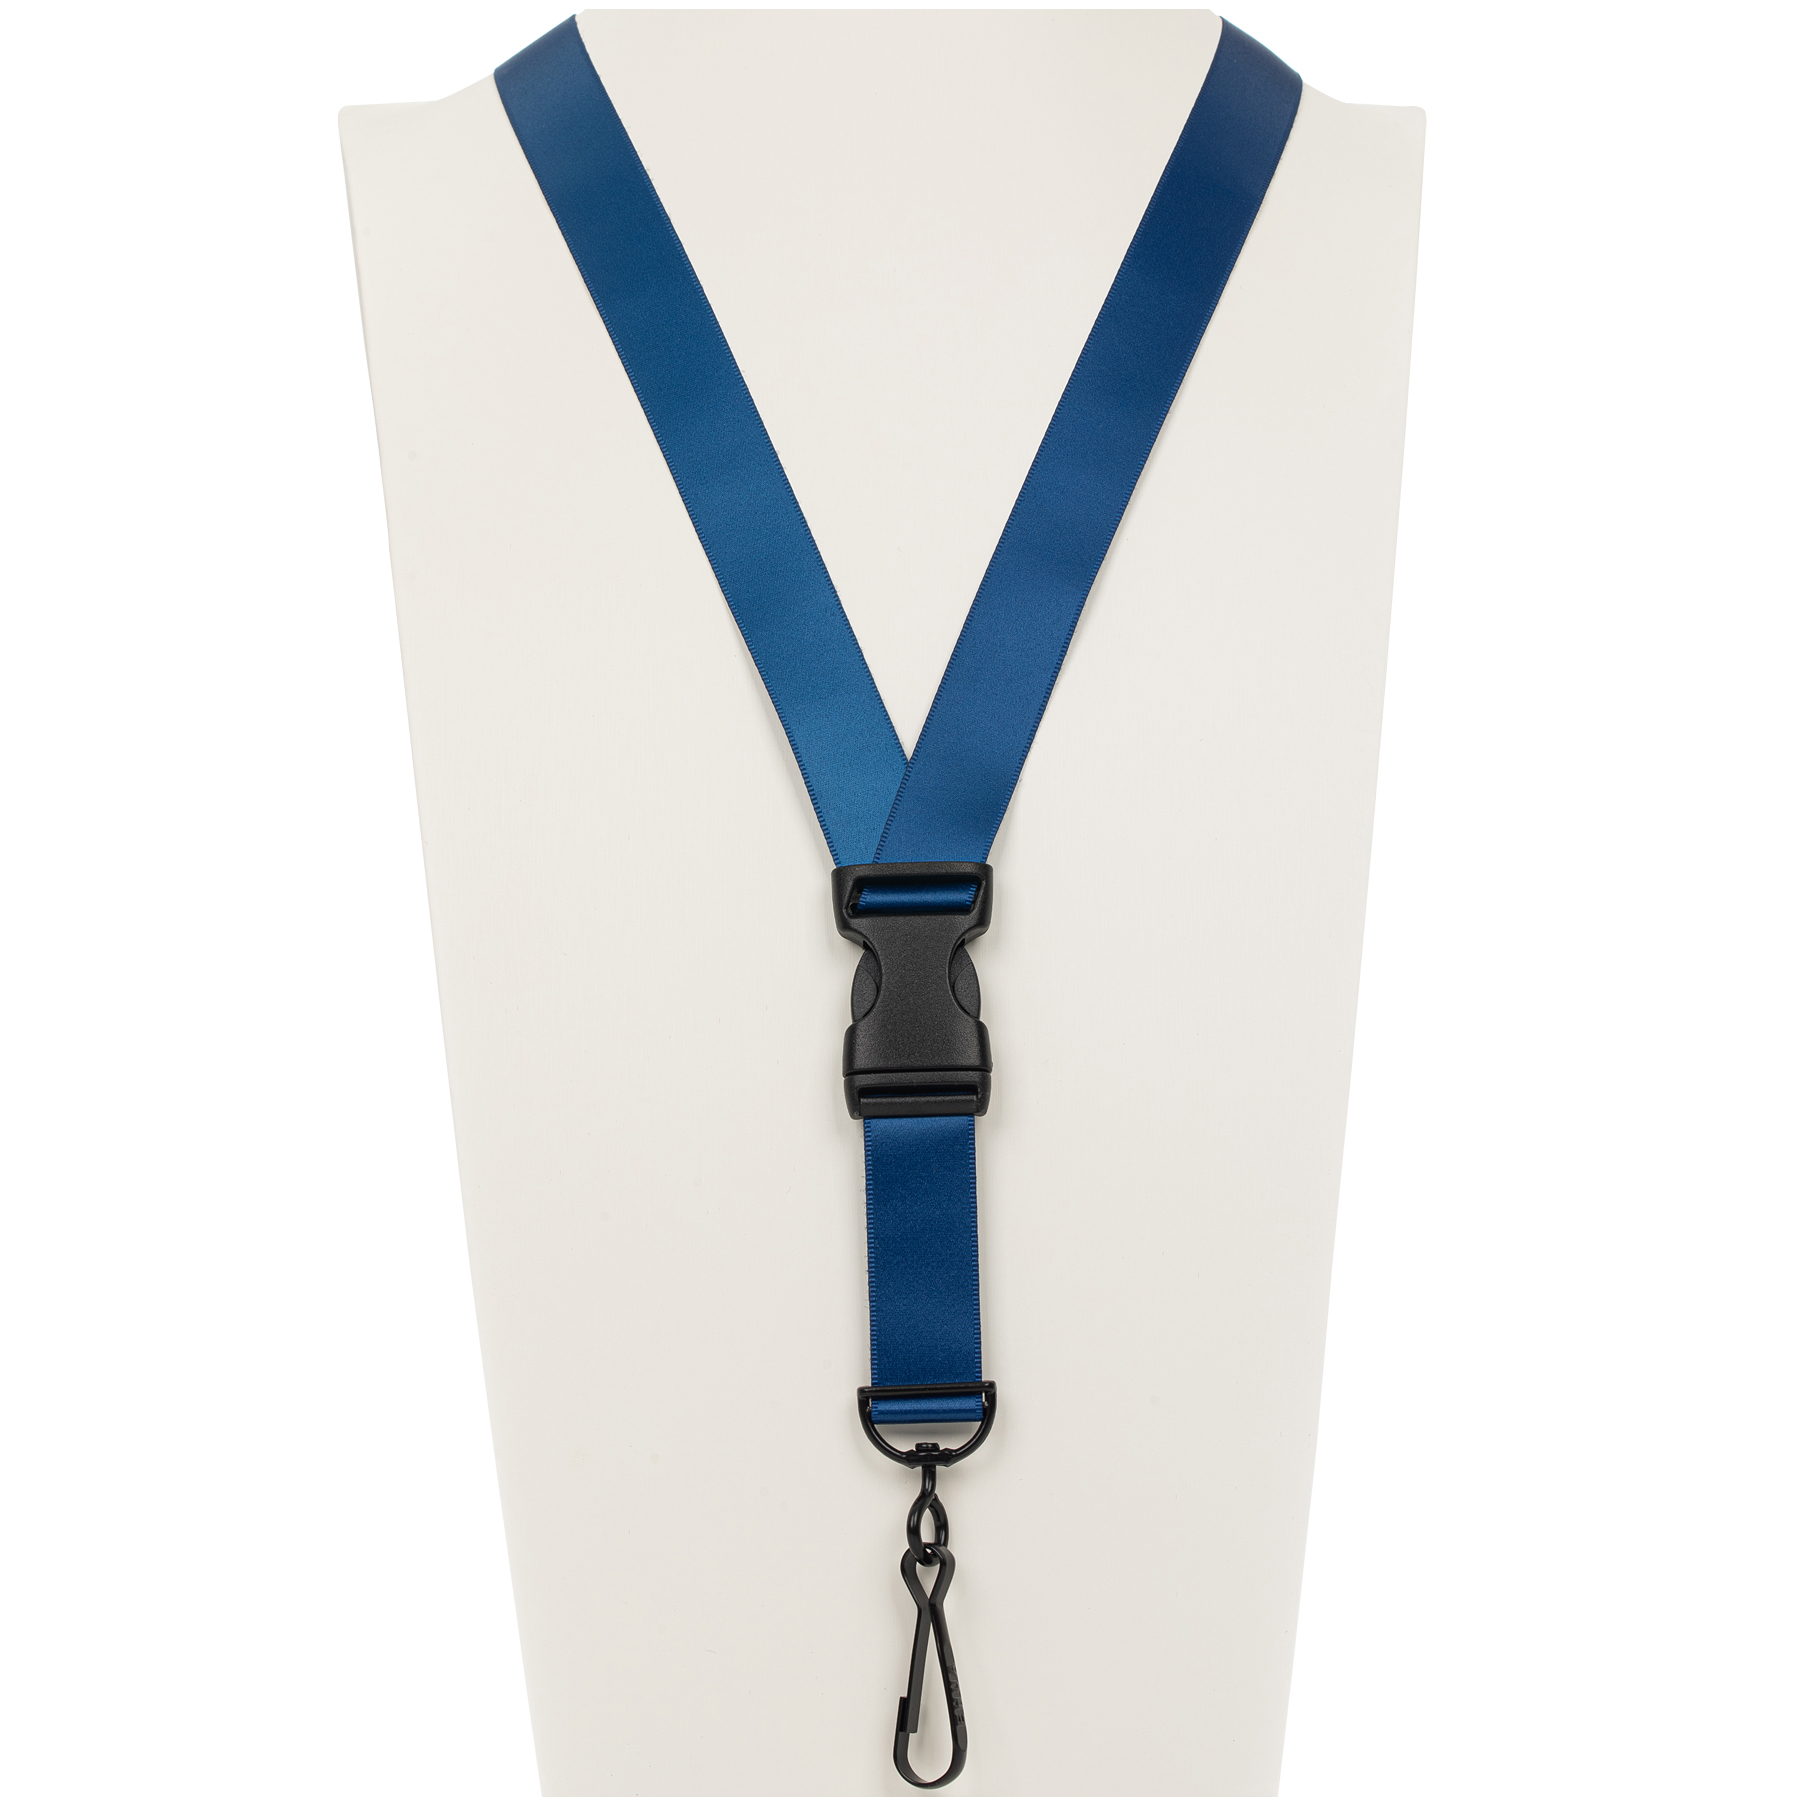 Thermal transfer business document lanyard